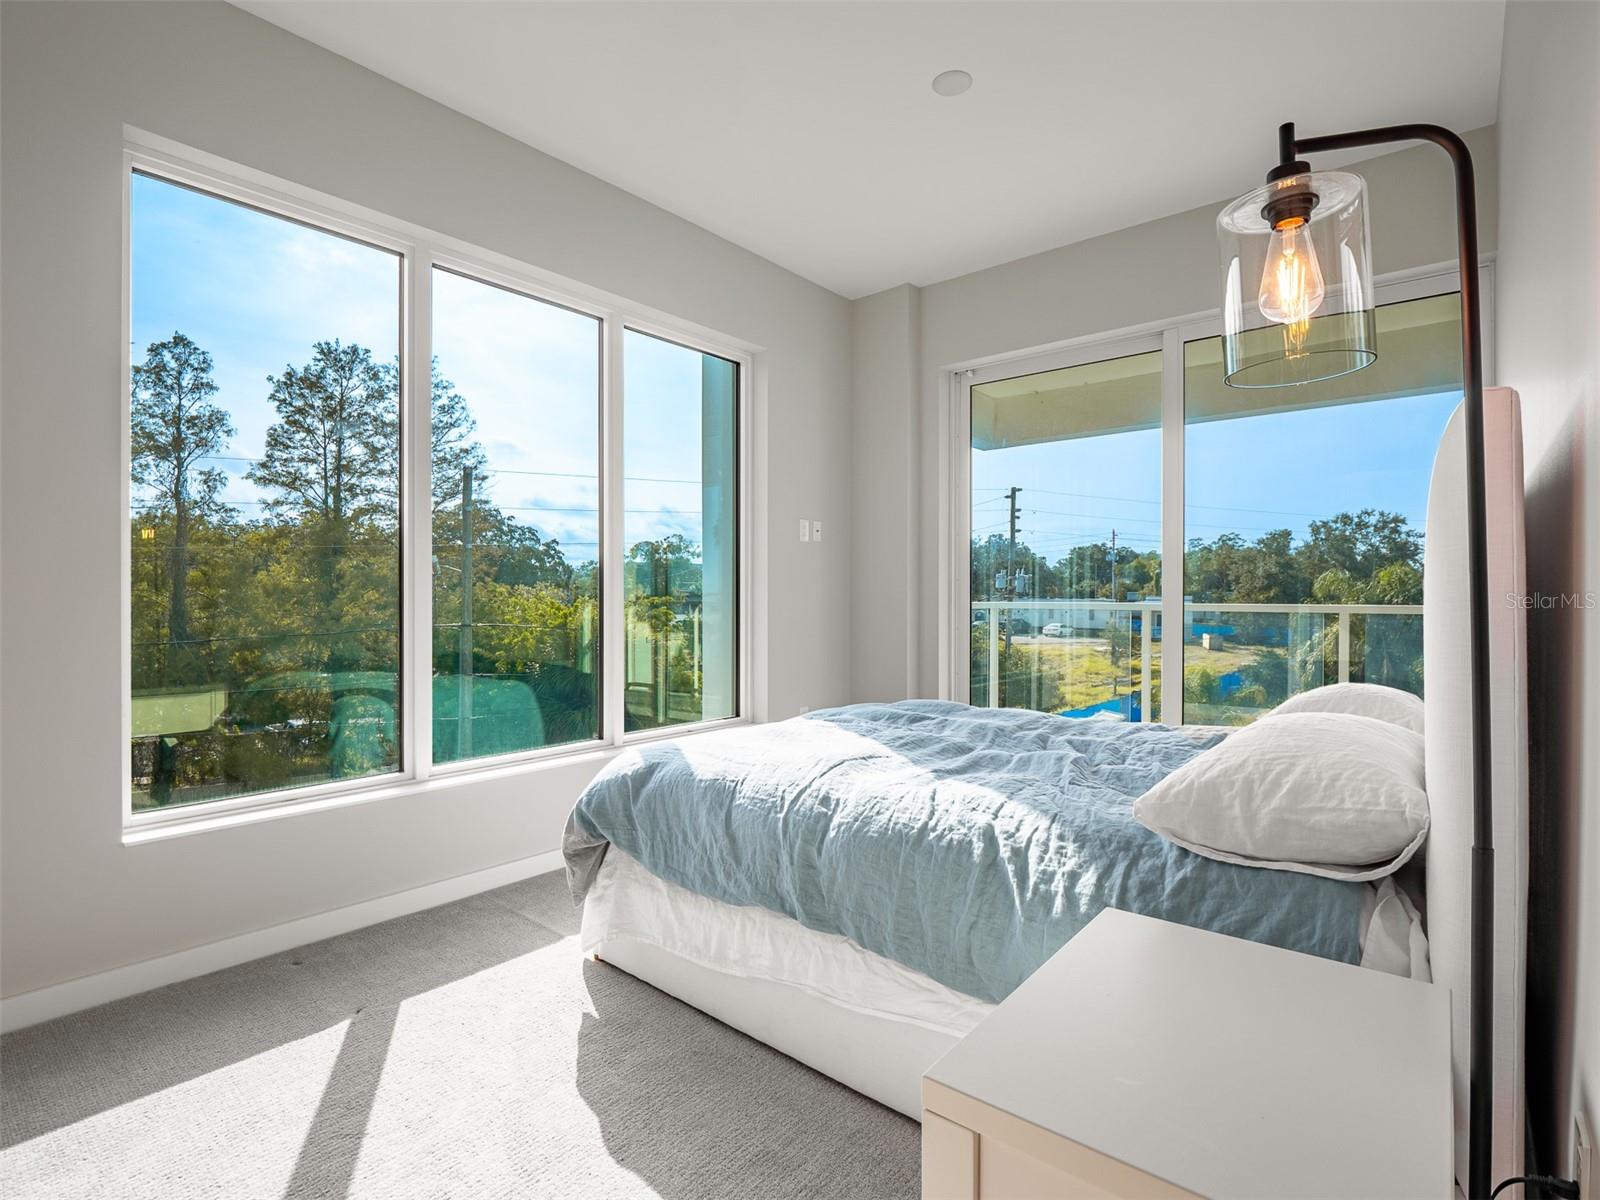 Second bedroom on the South-East corner for sunrise views and balcony